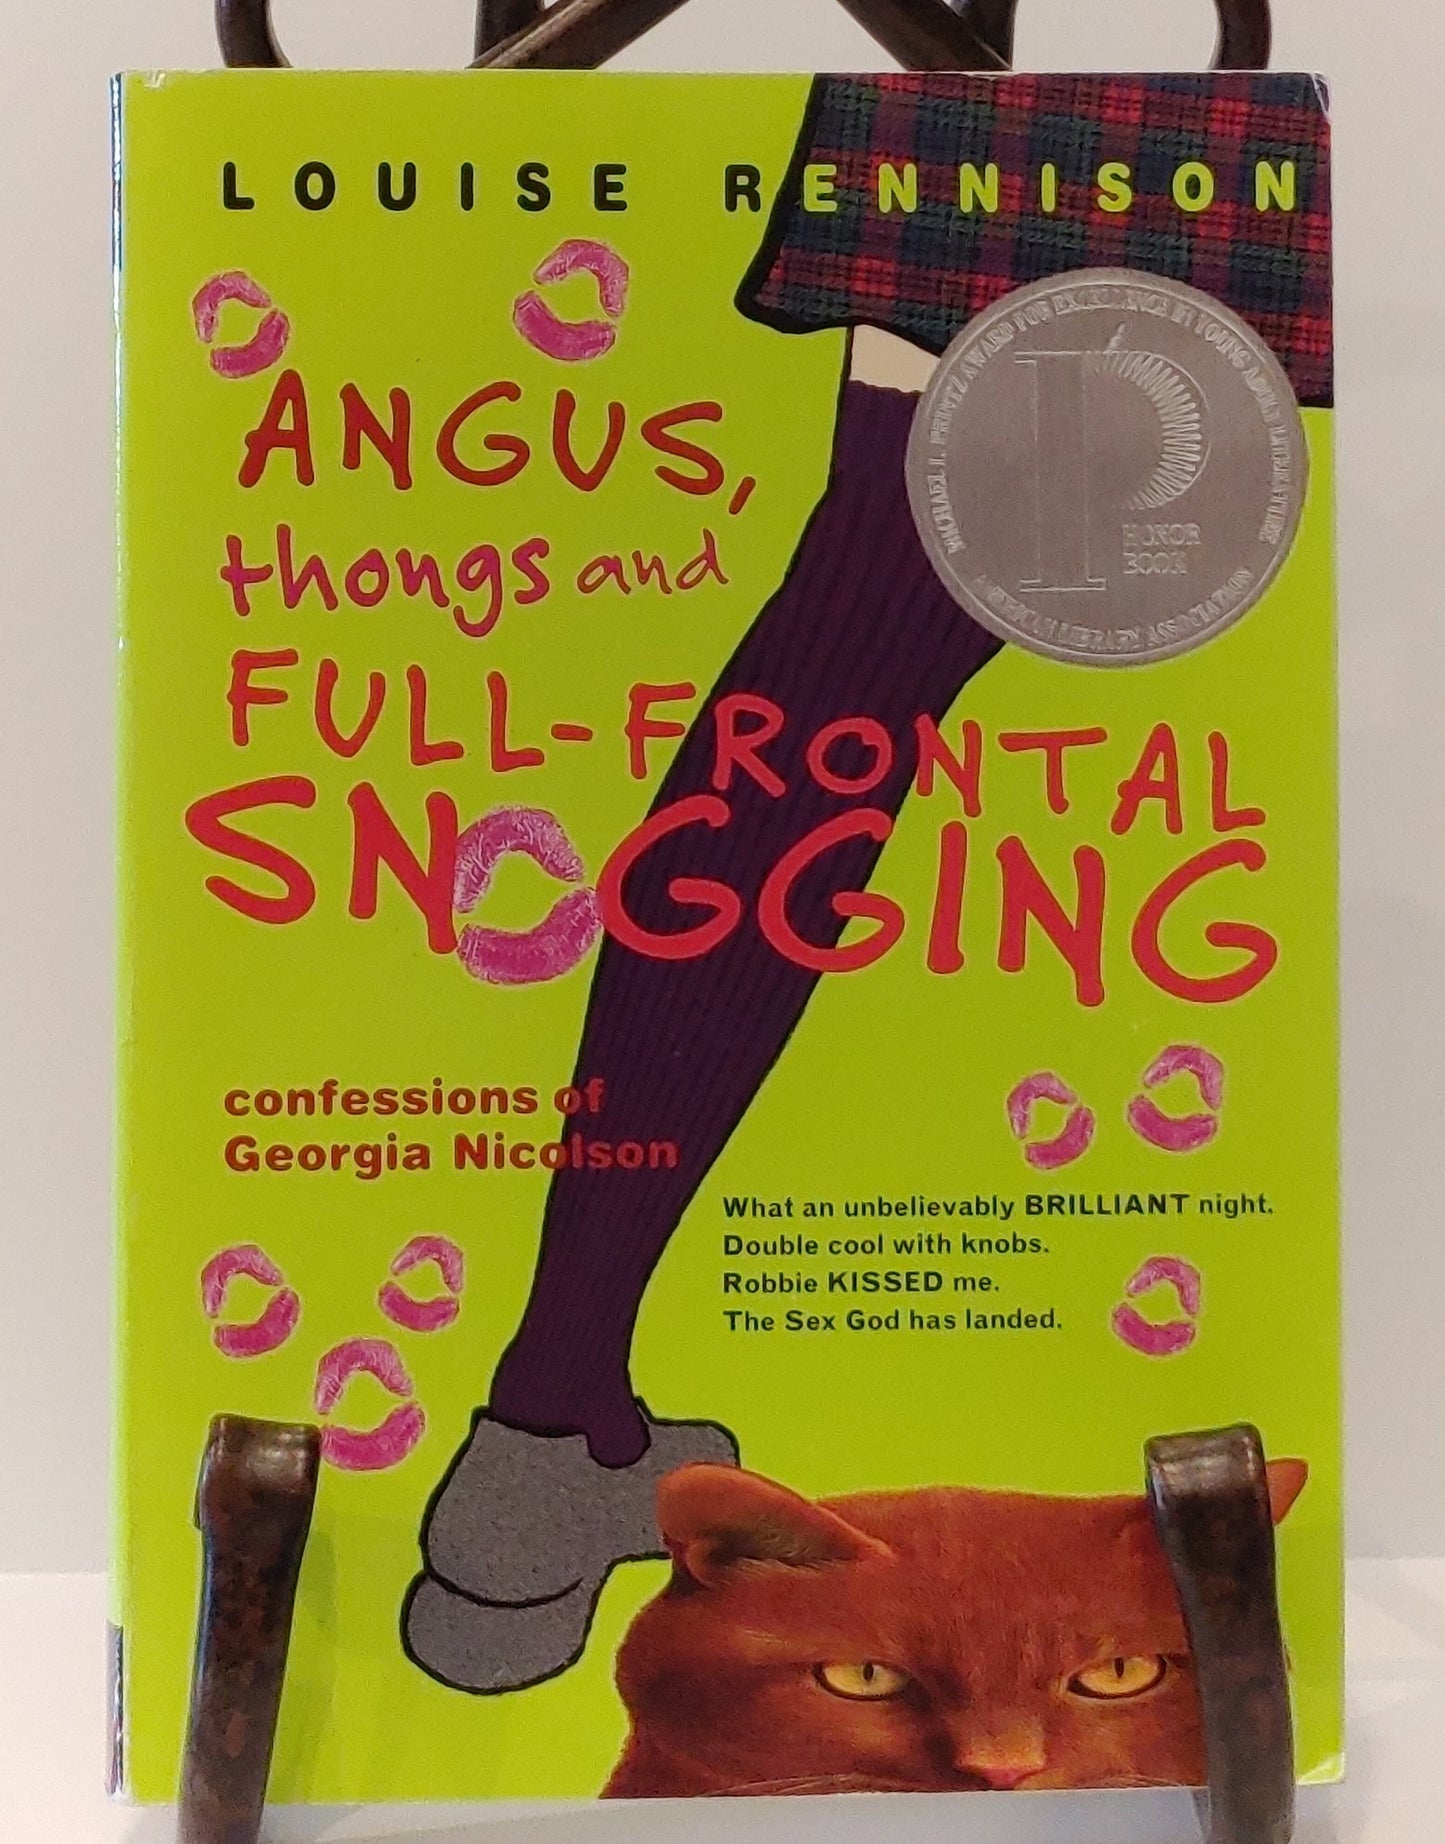 Angus, Thongs and Full-Frontal Snogging